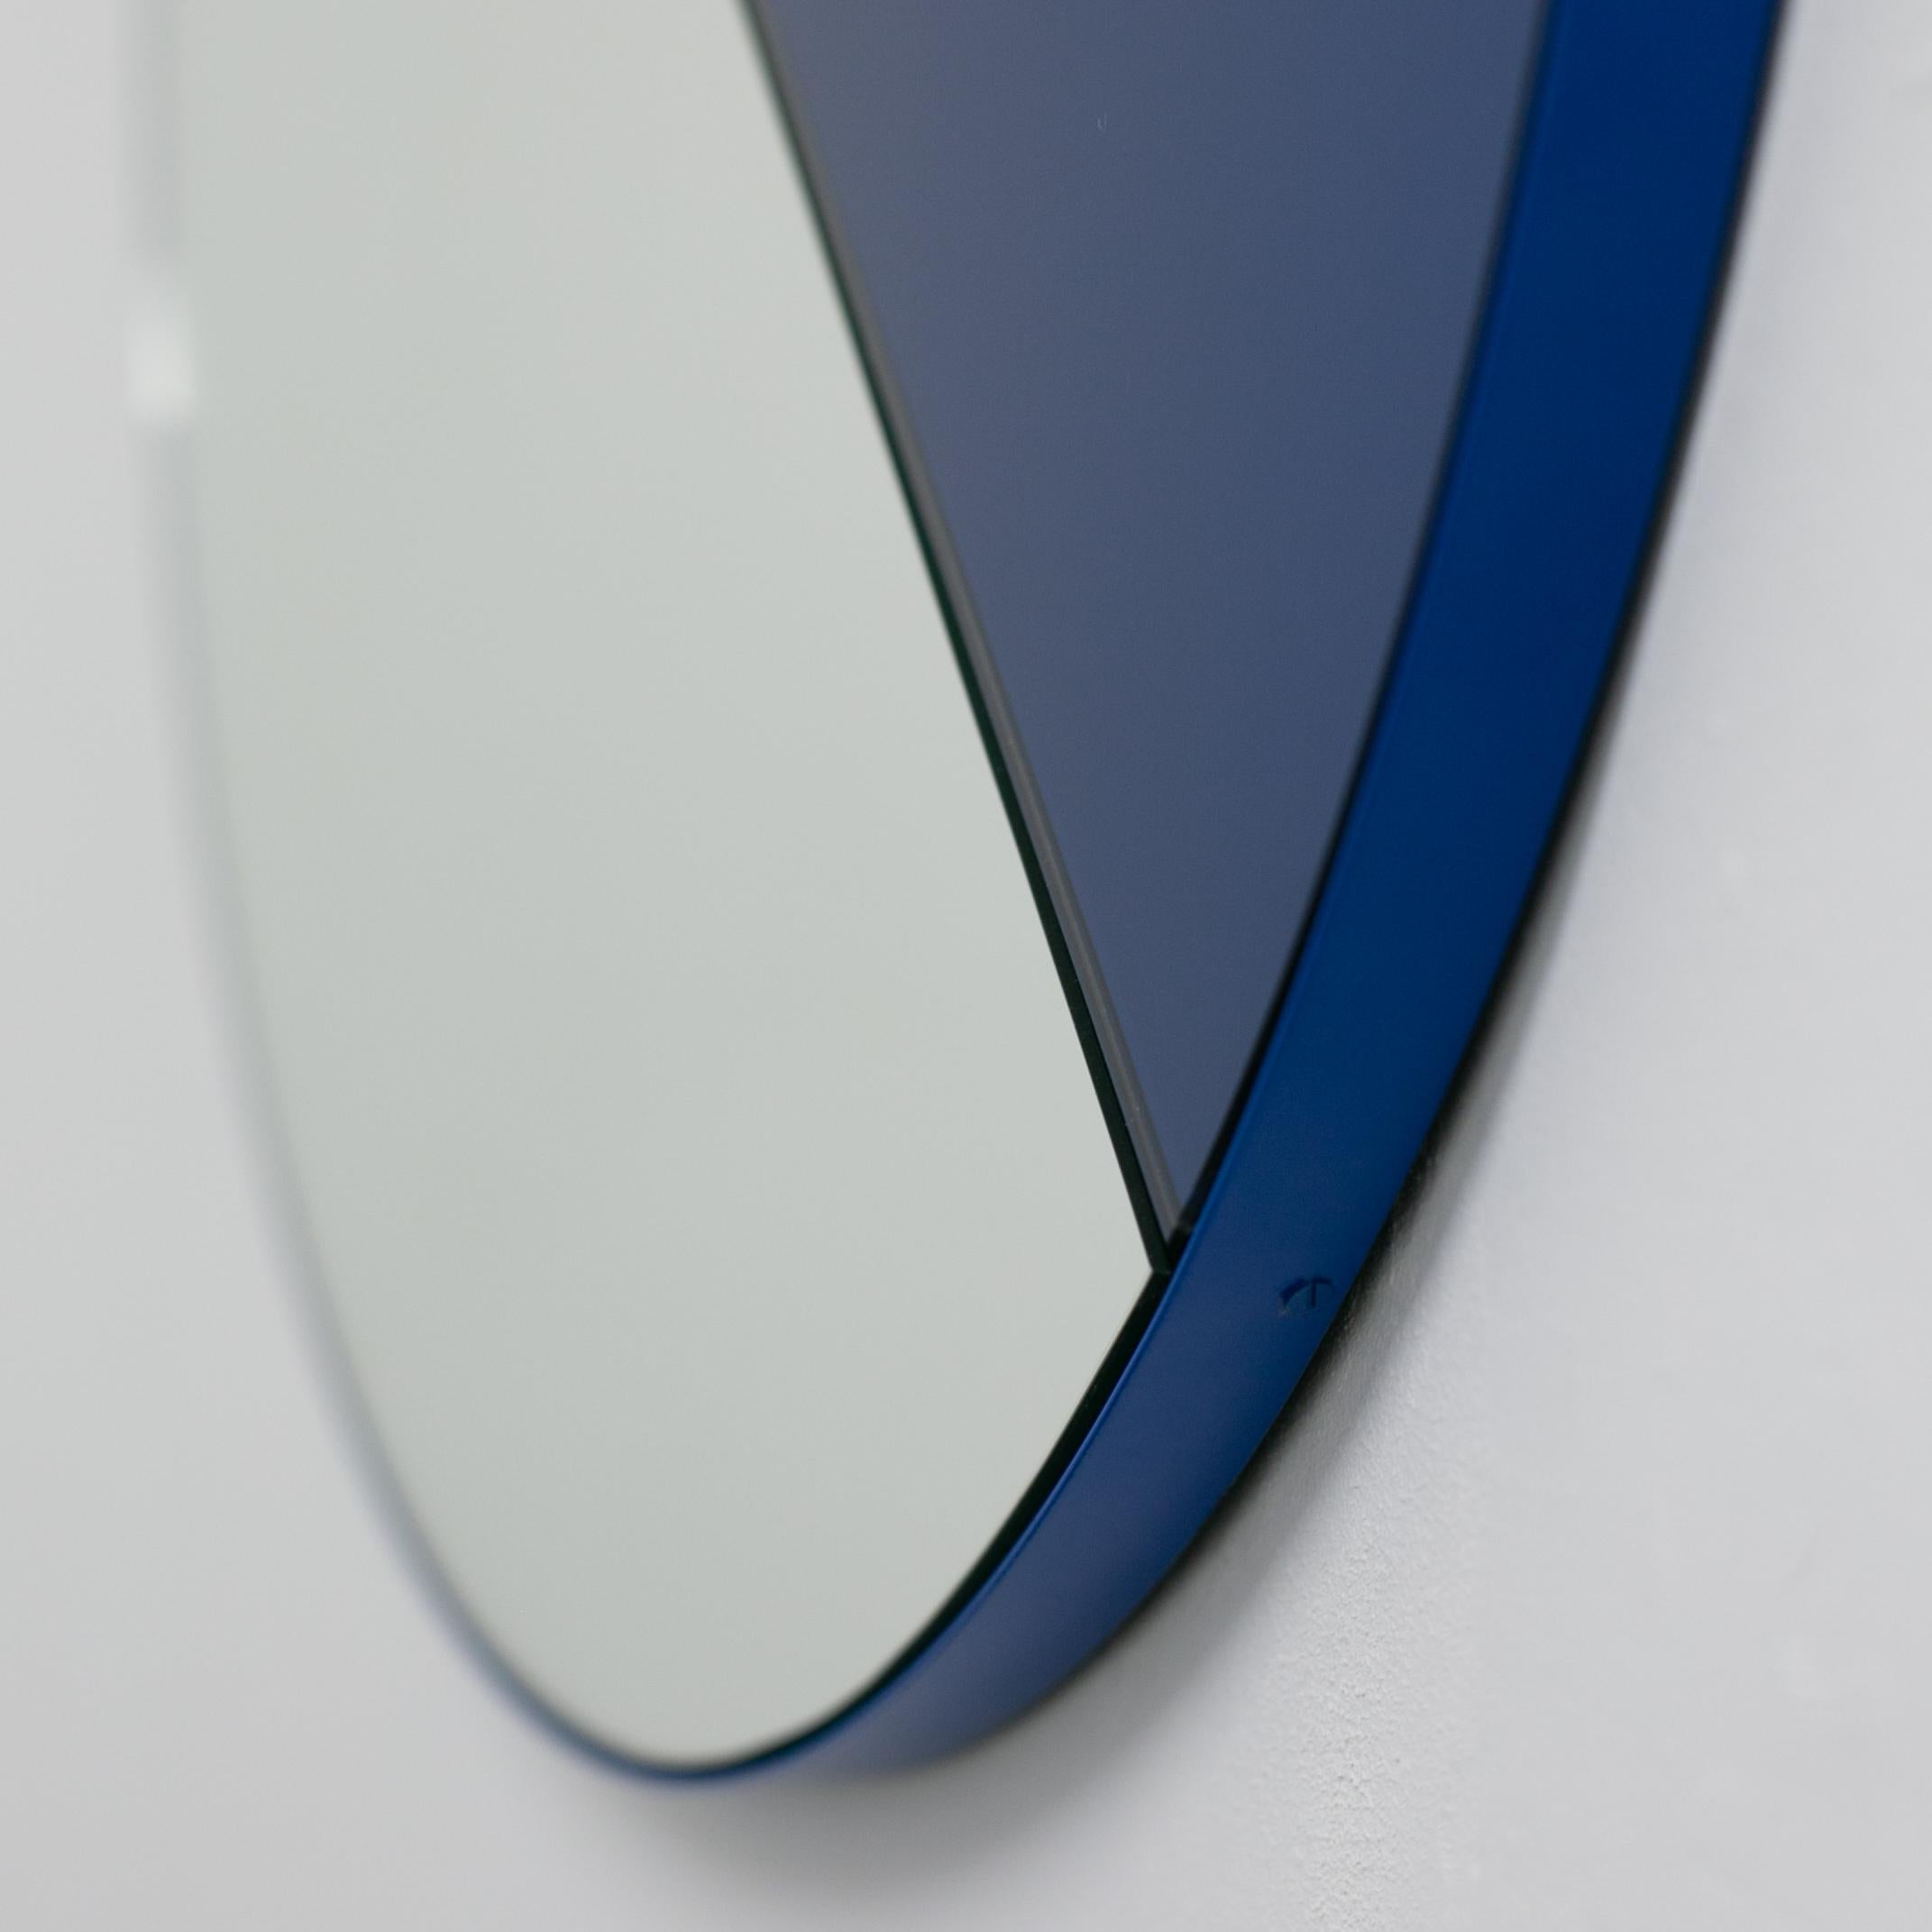 Powder-Coated In Stock Orbis Dualis Blue and Silver Tint Round Mirror with Blue Frame, Medium For Sale